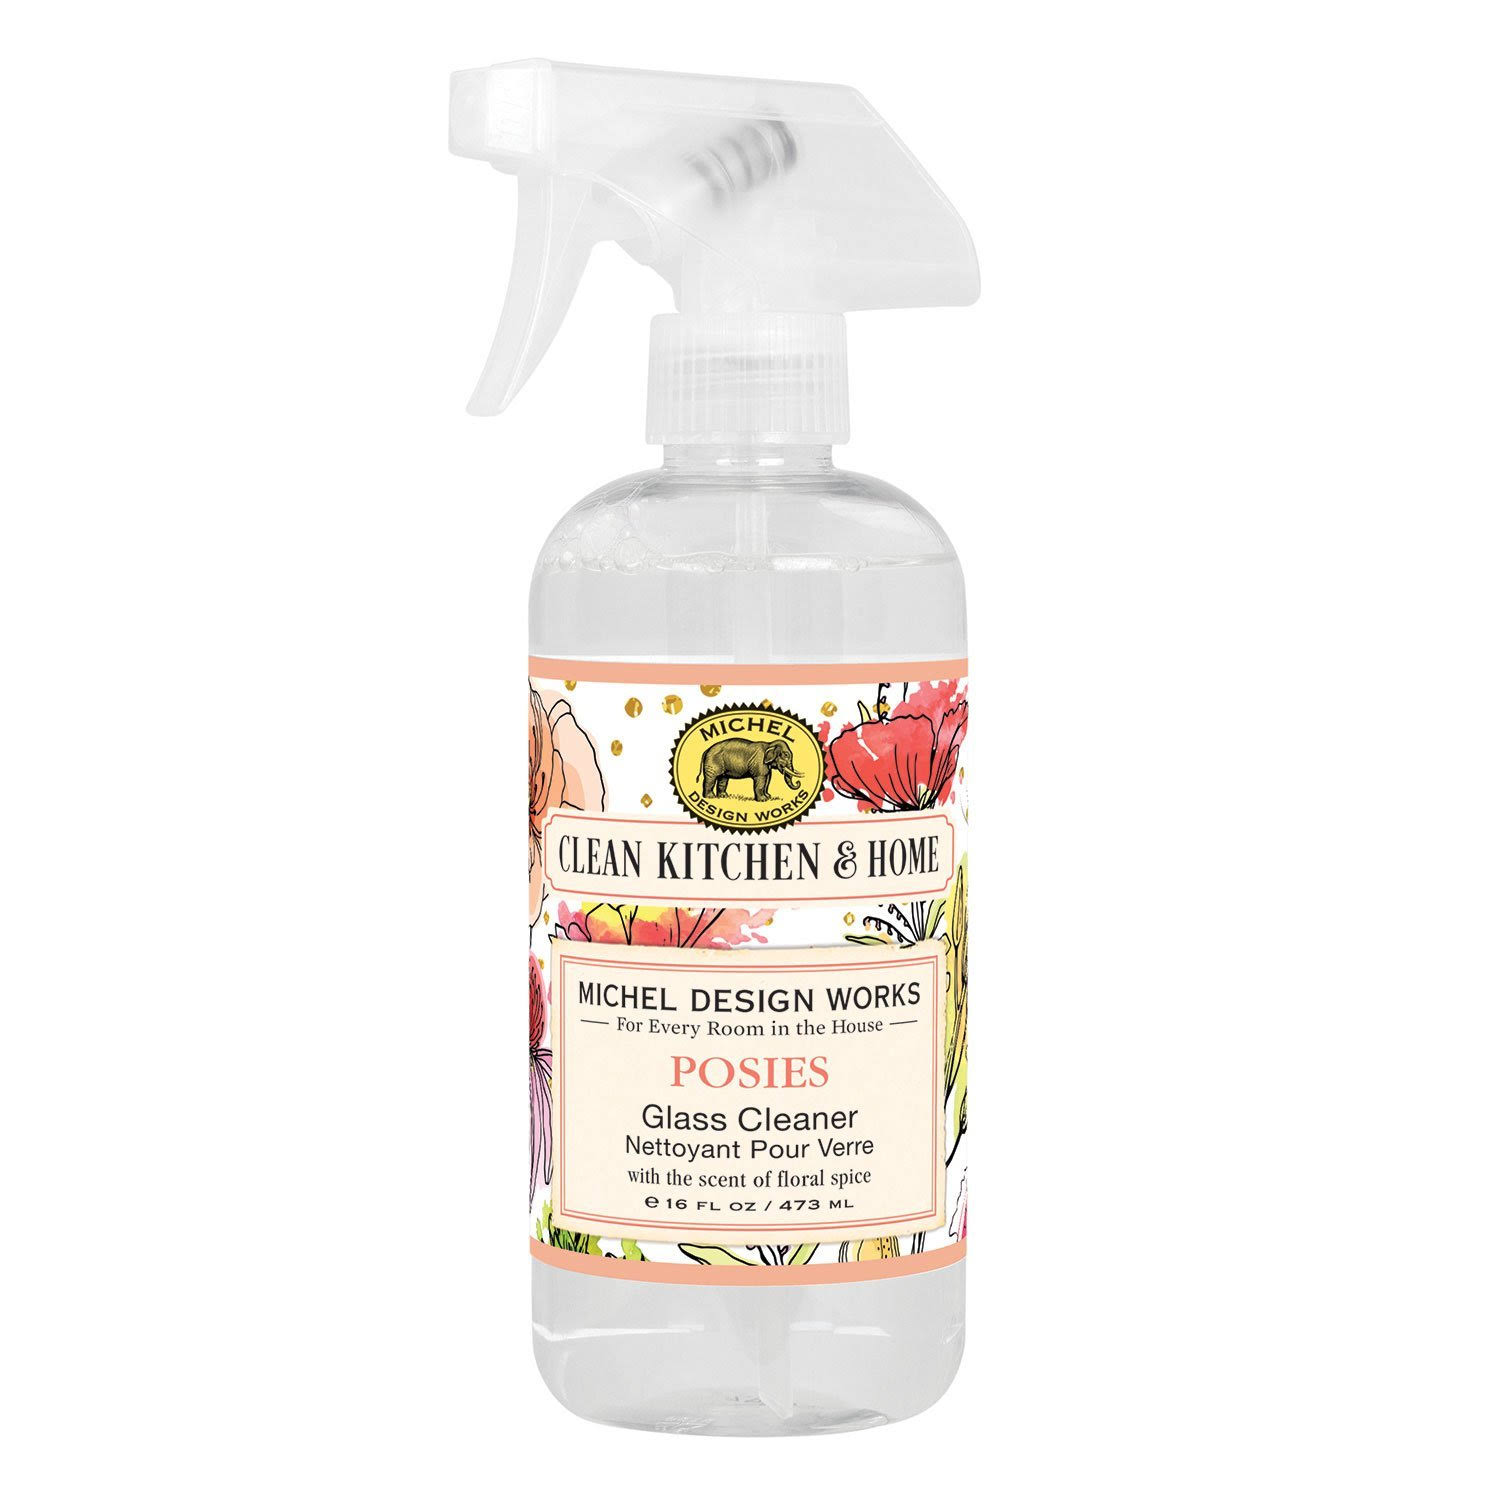 Michel Design Works : Posies Glass Cleaner